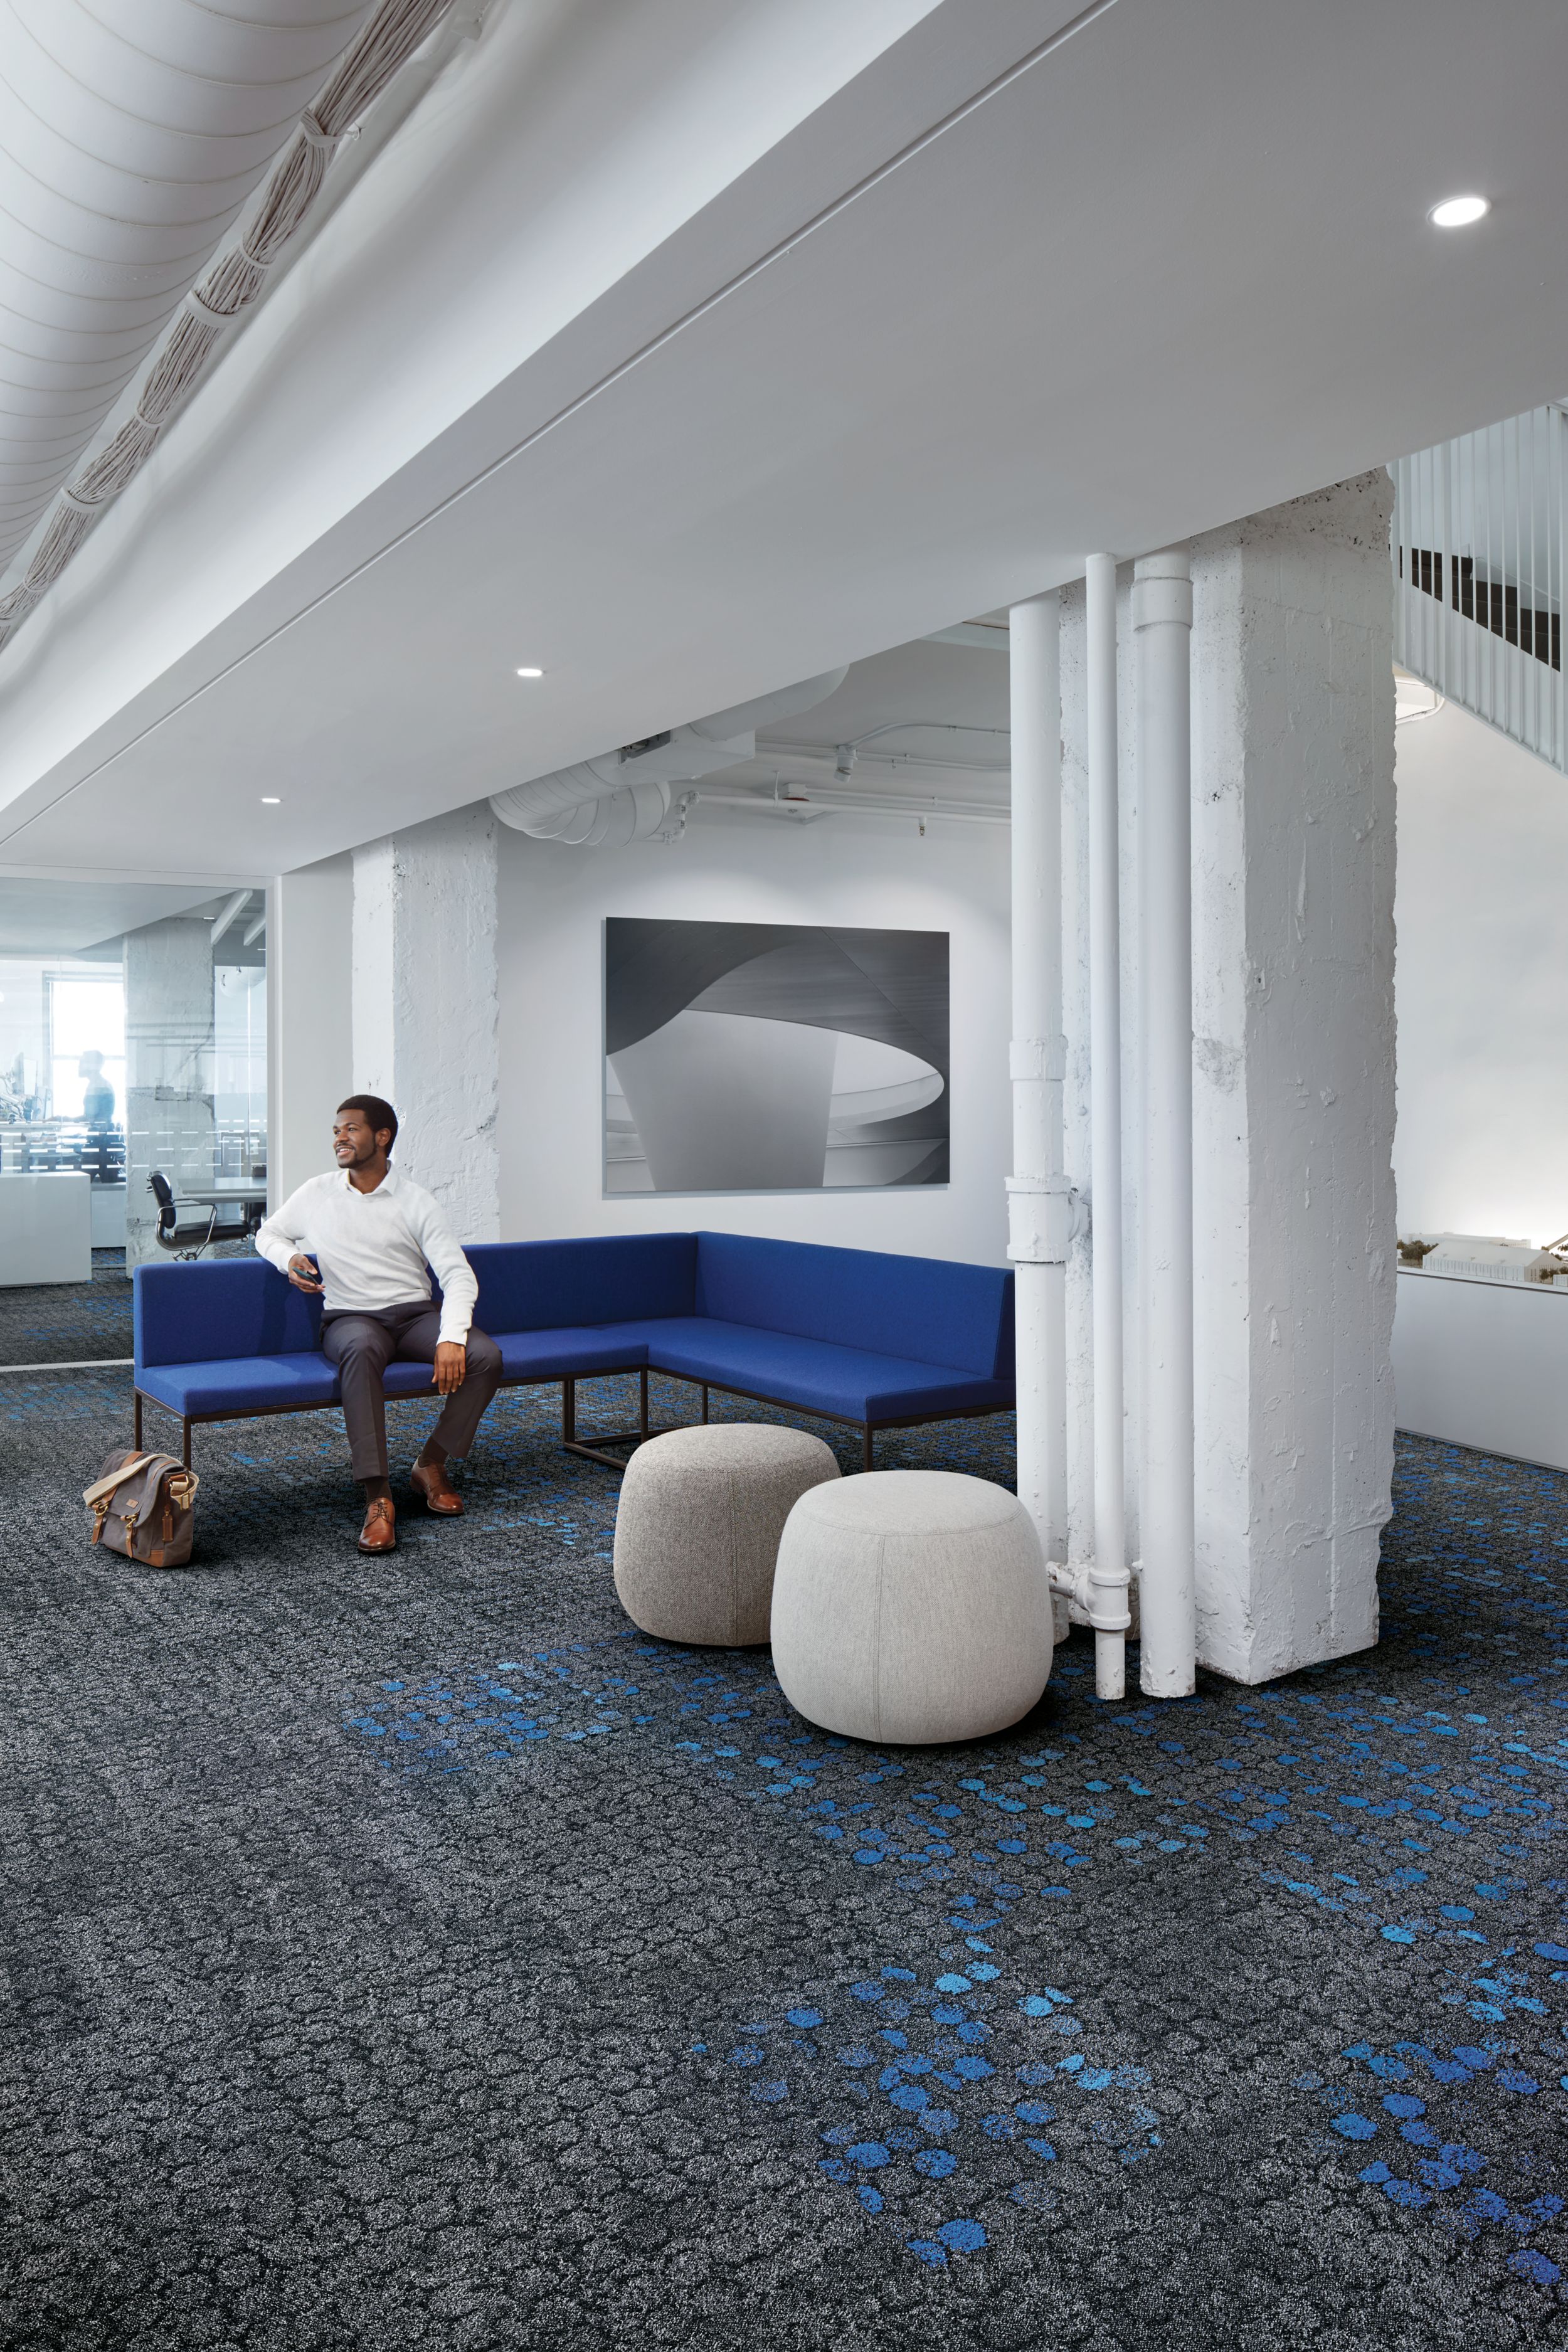 Interface Broome Street and Mercer Street carpet tile in lobby with man seated on blue couch número de imagen 3